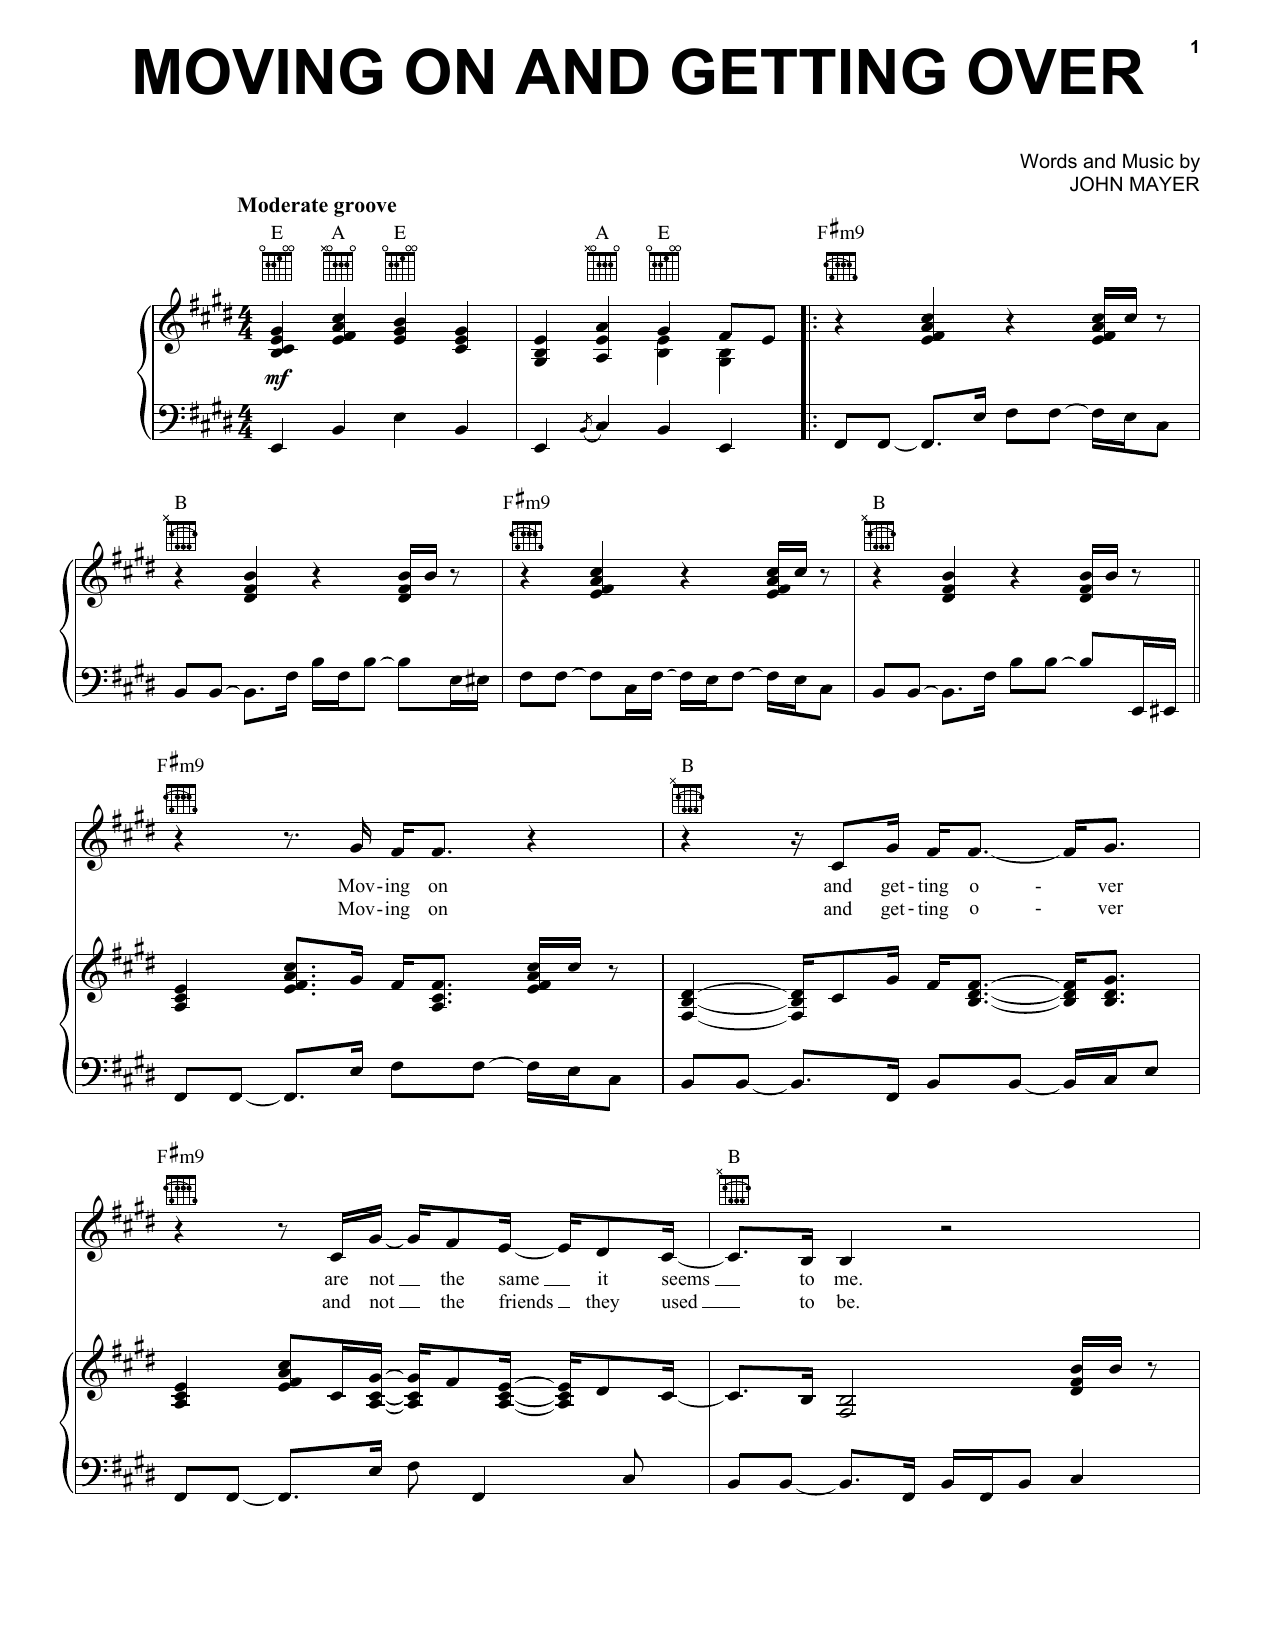 Download John Mayer Moving On And Getting Over Sheet Music